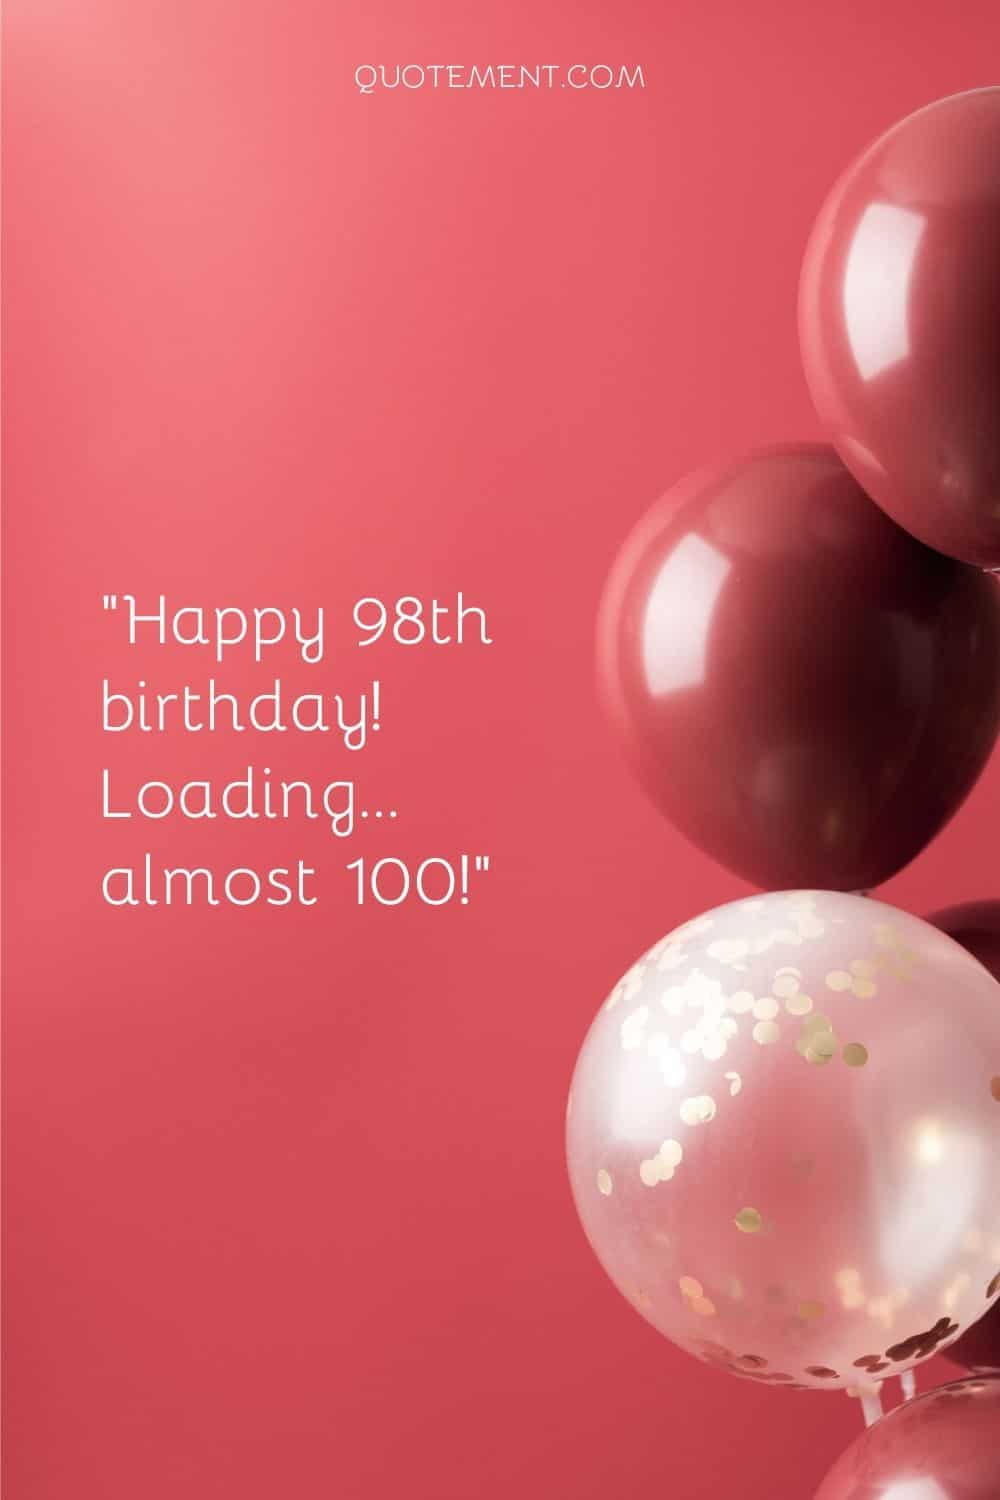 Happy 98th birthday! Loading… almost 100!